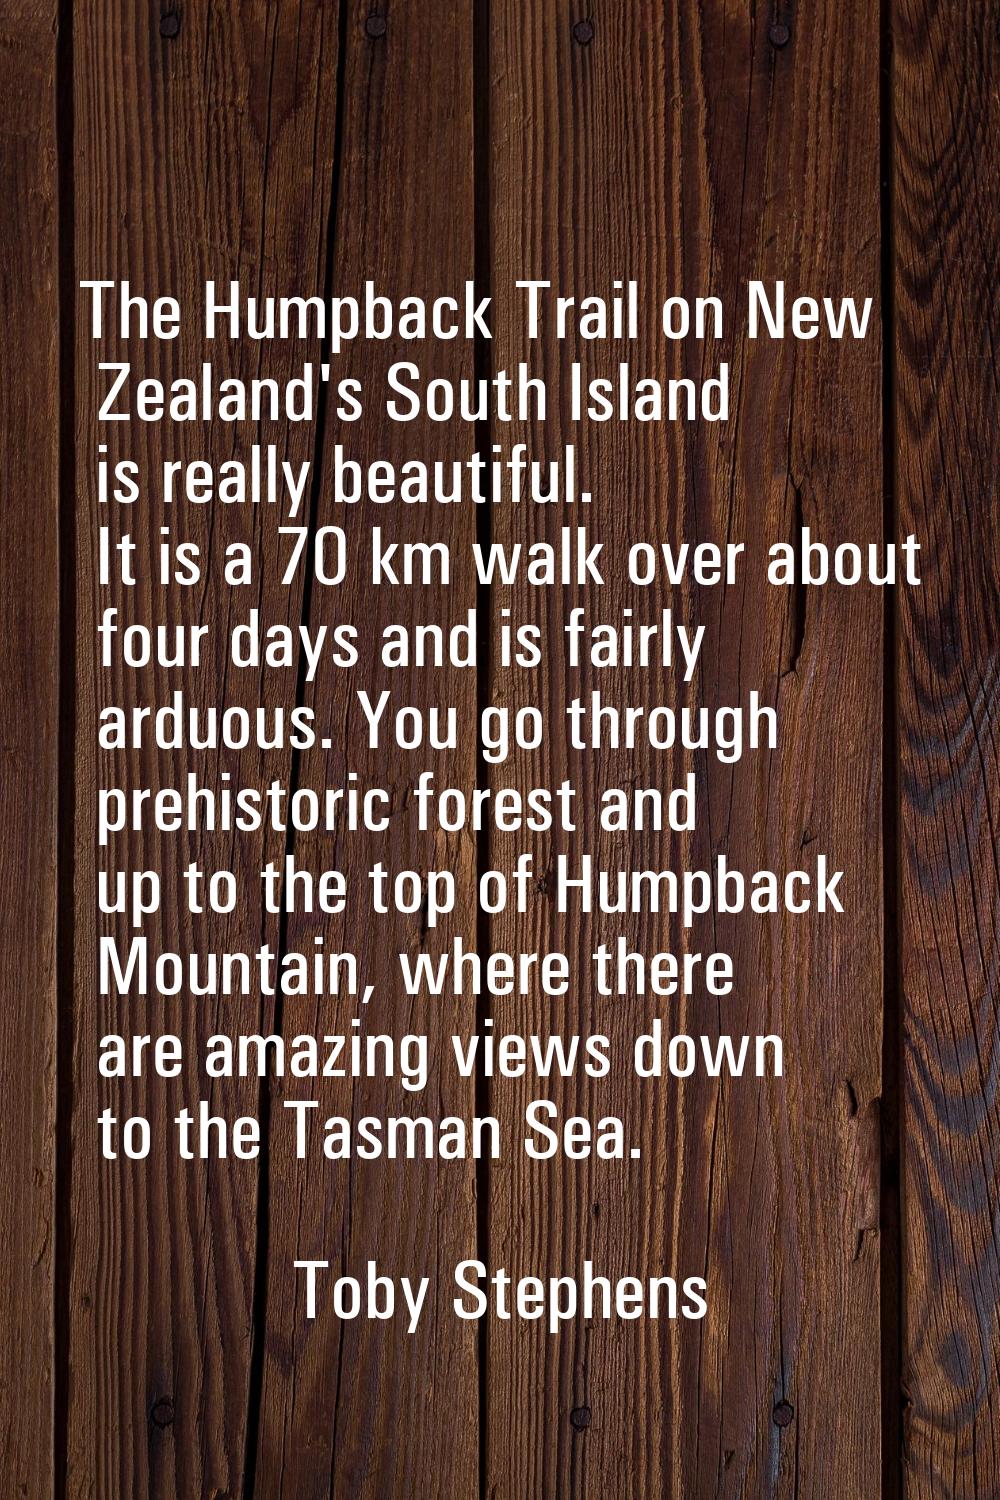 The Humpback Trail on New Zealand's South Island is really beautiful. It is a 70 km walk over about